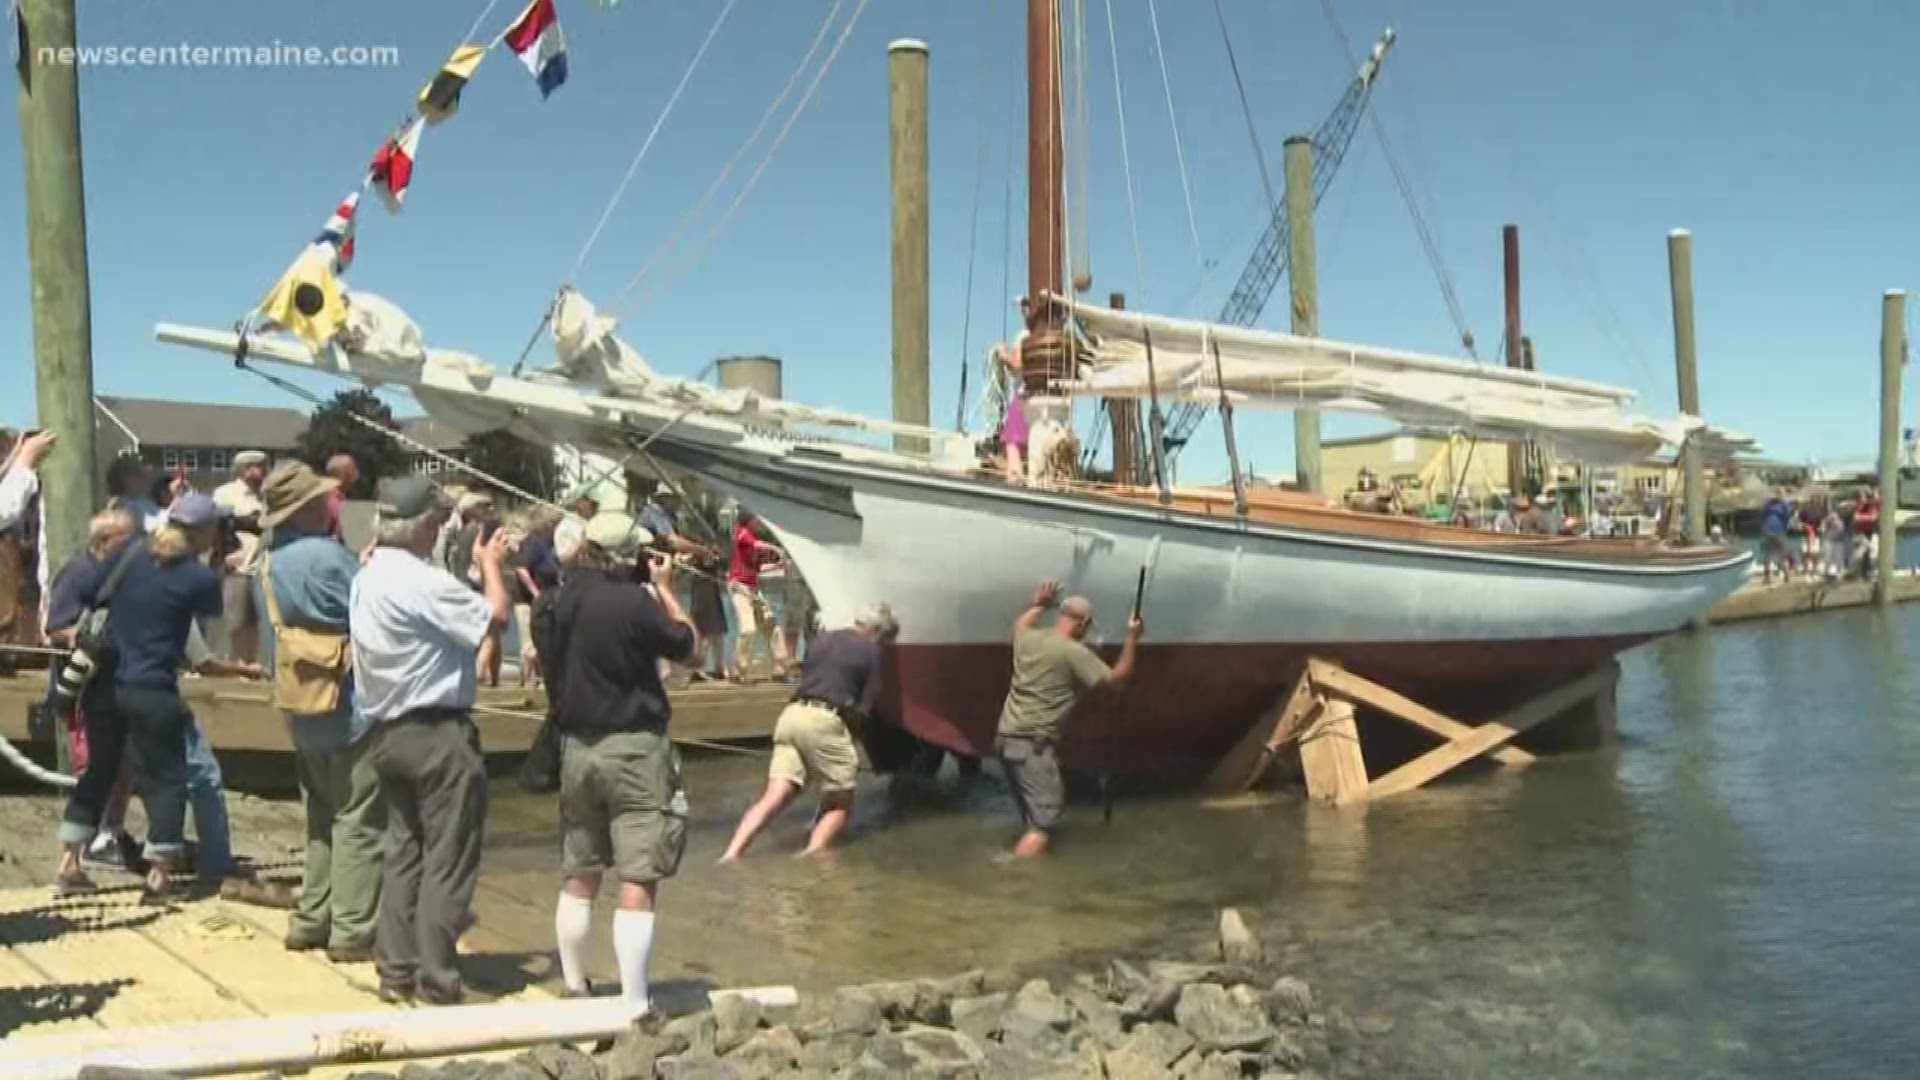 118-year-old Lobster boat sets sail